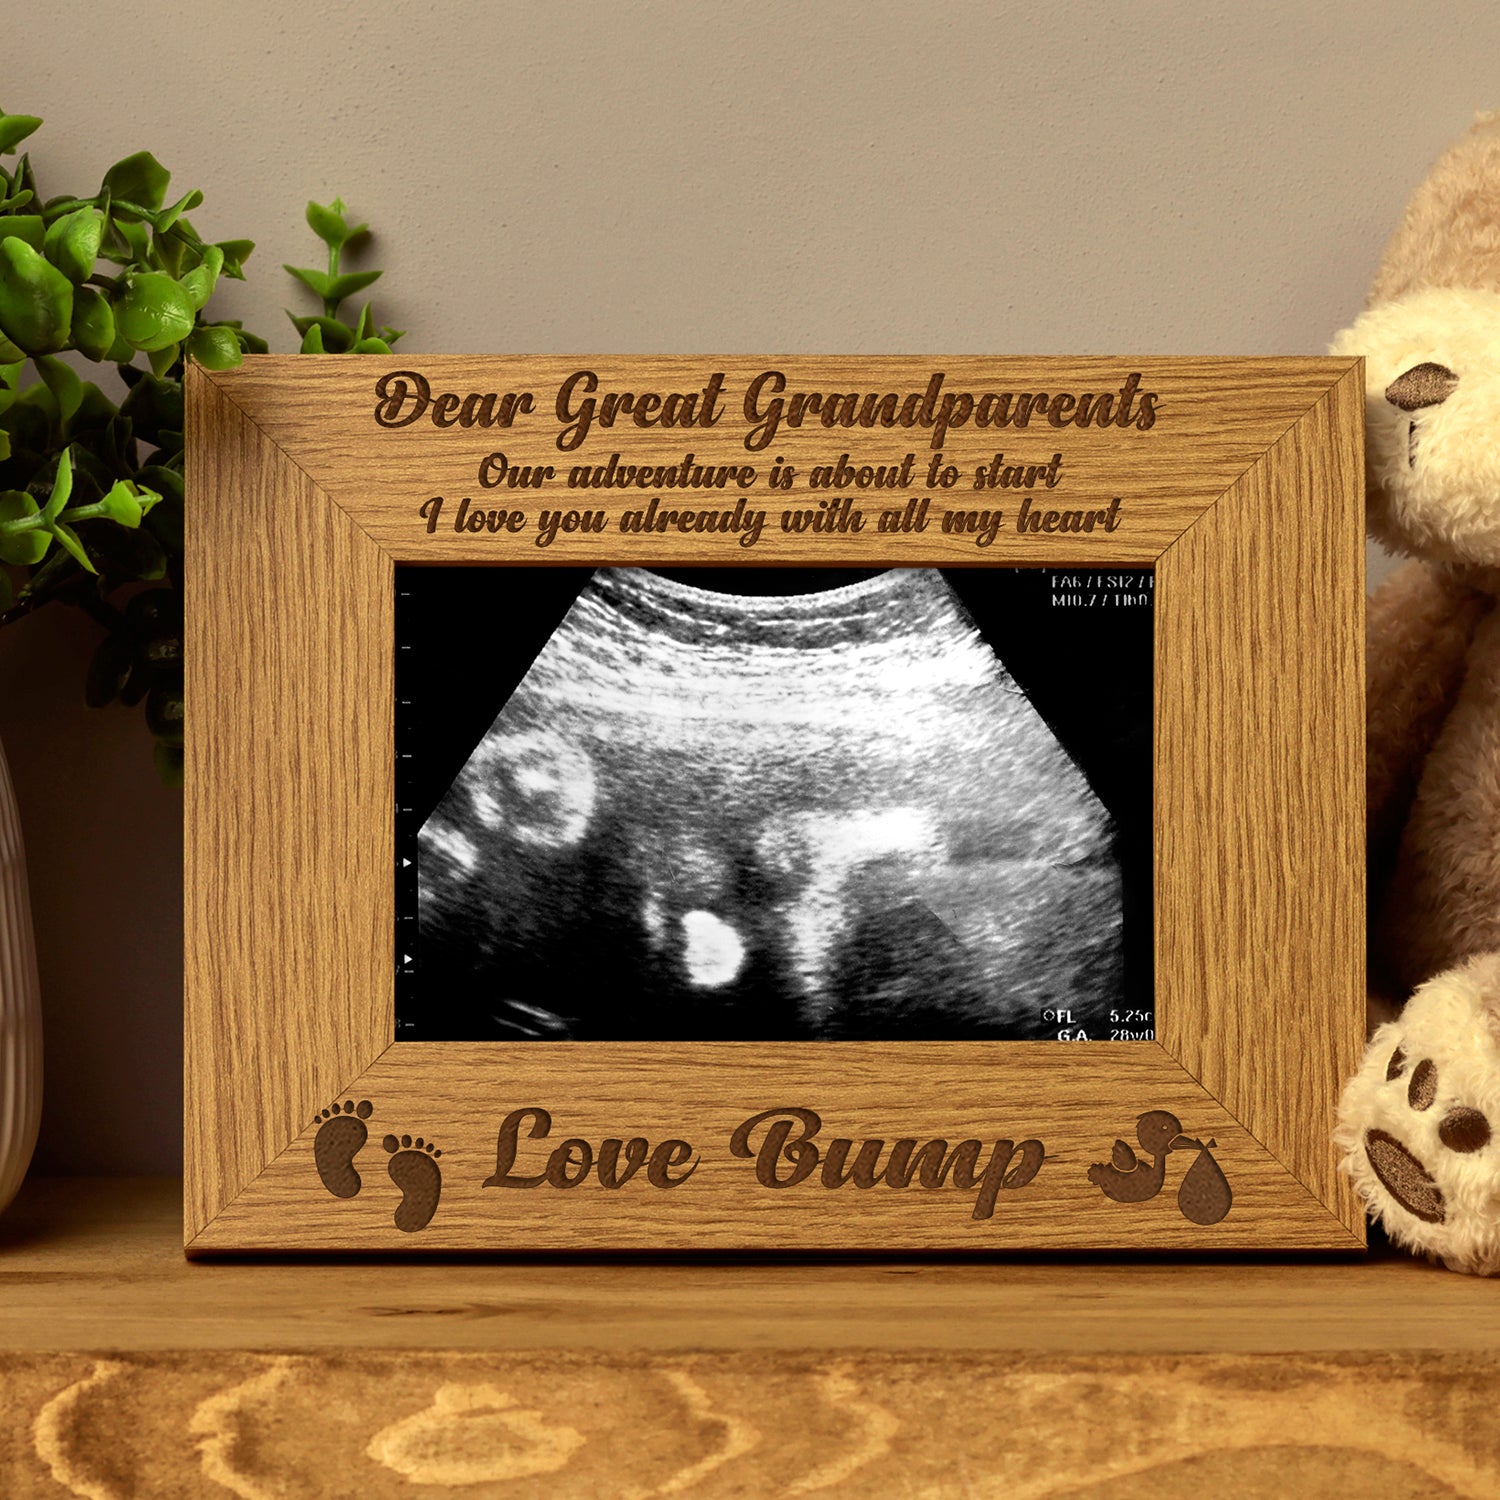 New Baby Pregnancy Scan Wooden Photo Frame Great Grandparents To Be Gift - ukgiftstoreonline